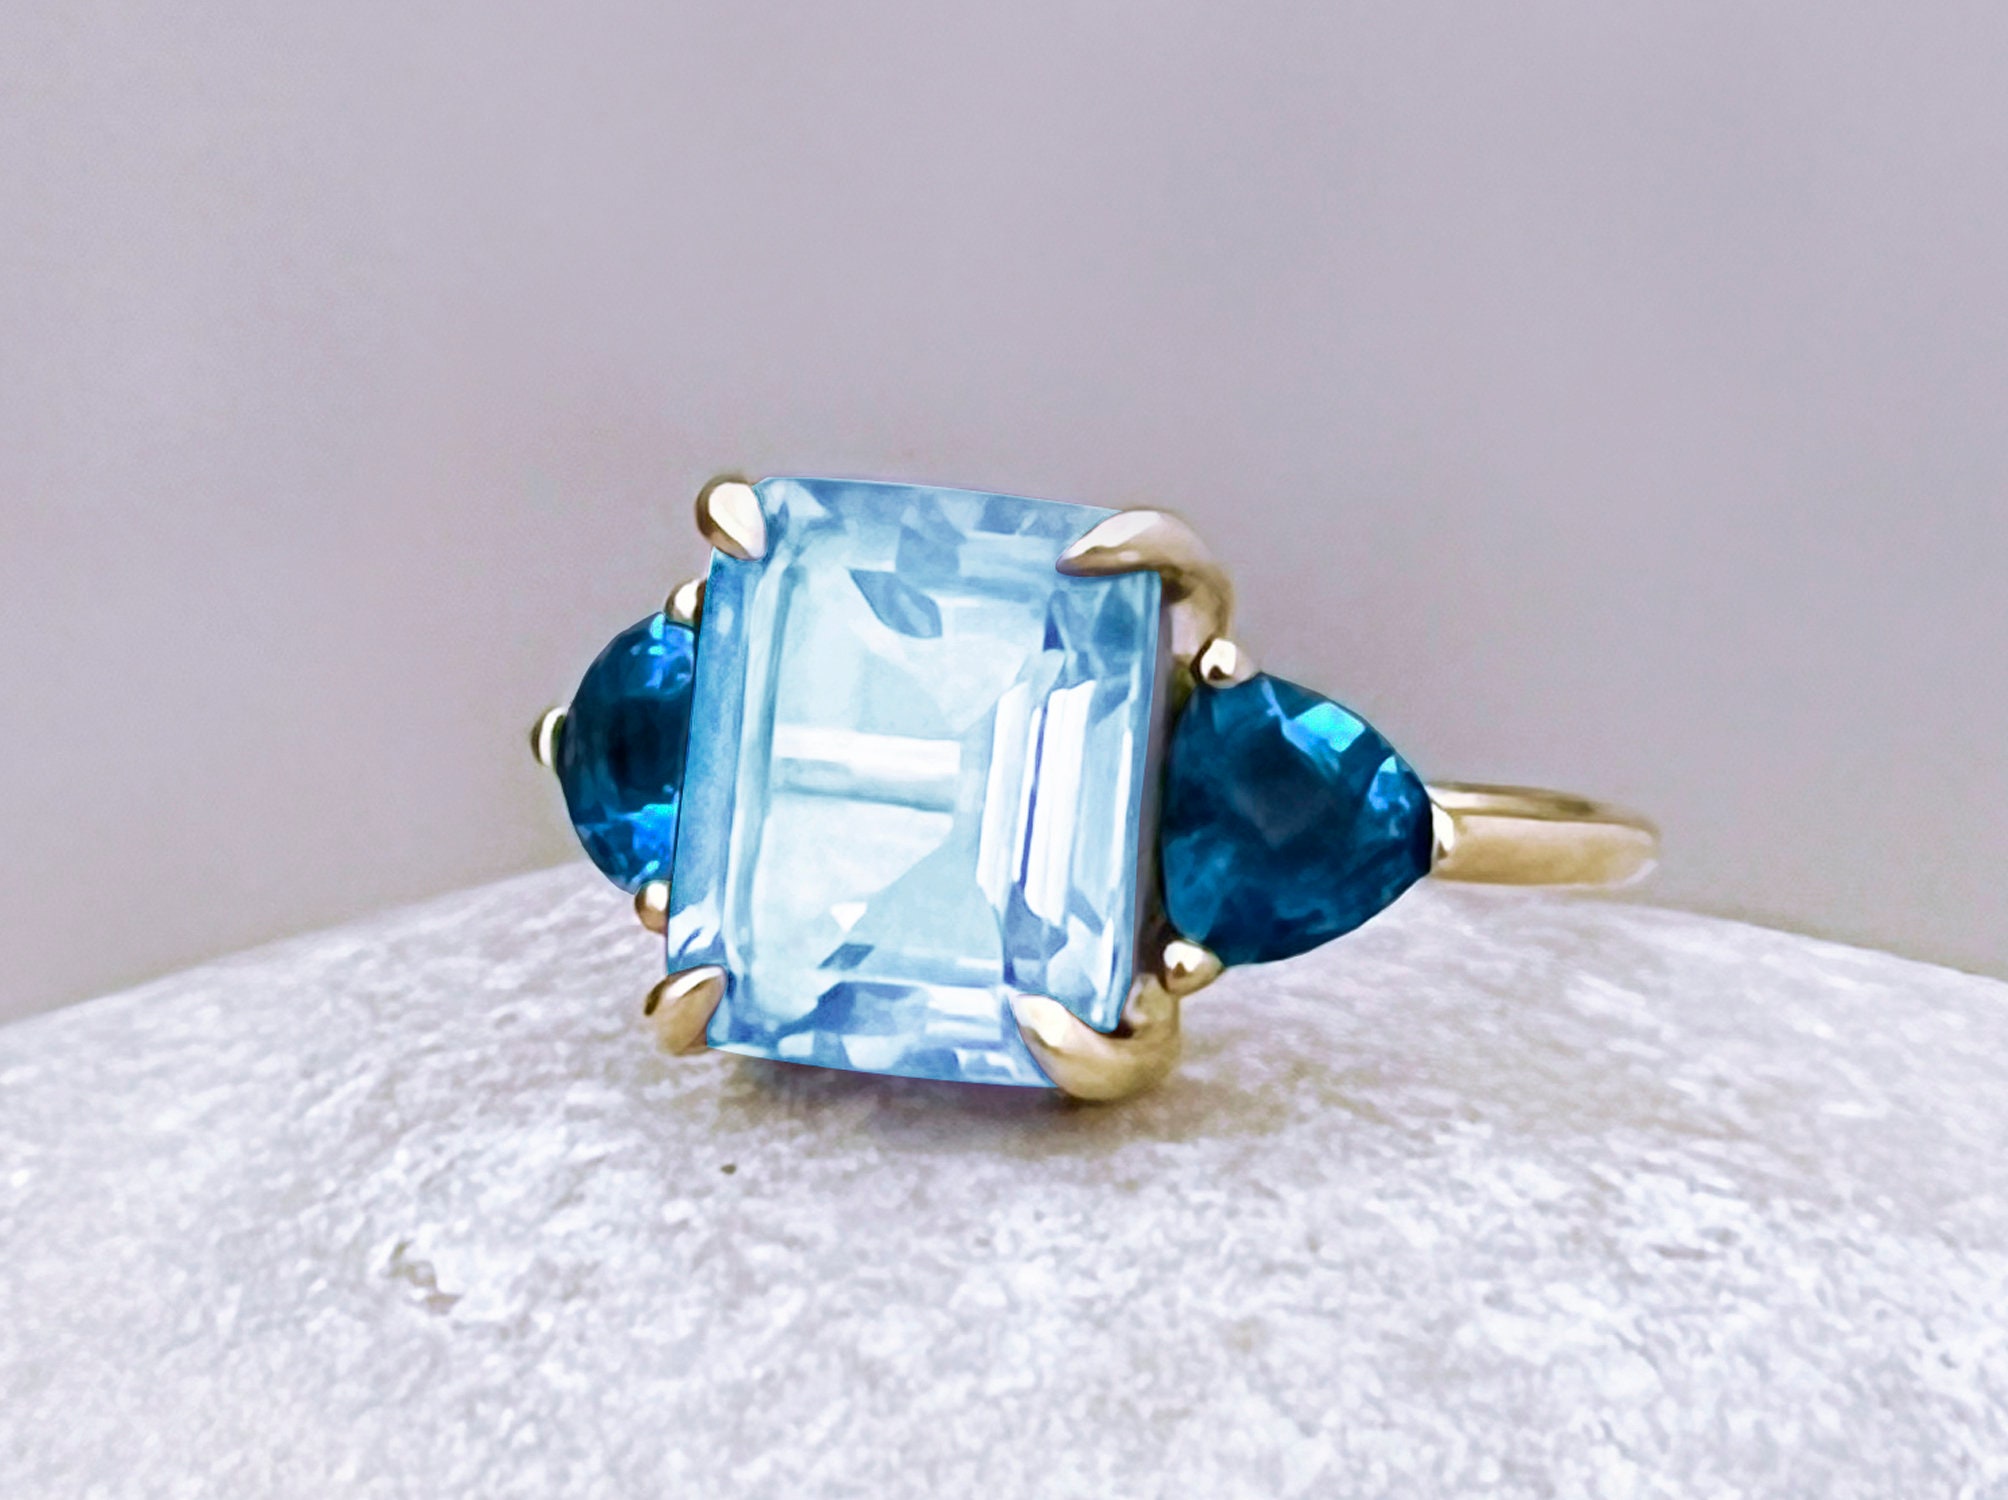 Solid Gold Engagement Ring With Emerald Cut Blue Topaz, London Blue ...